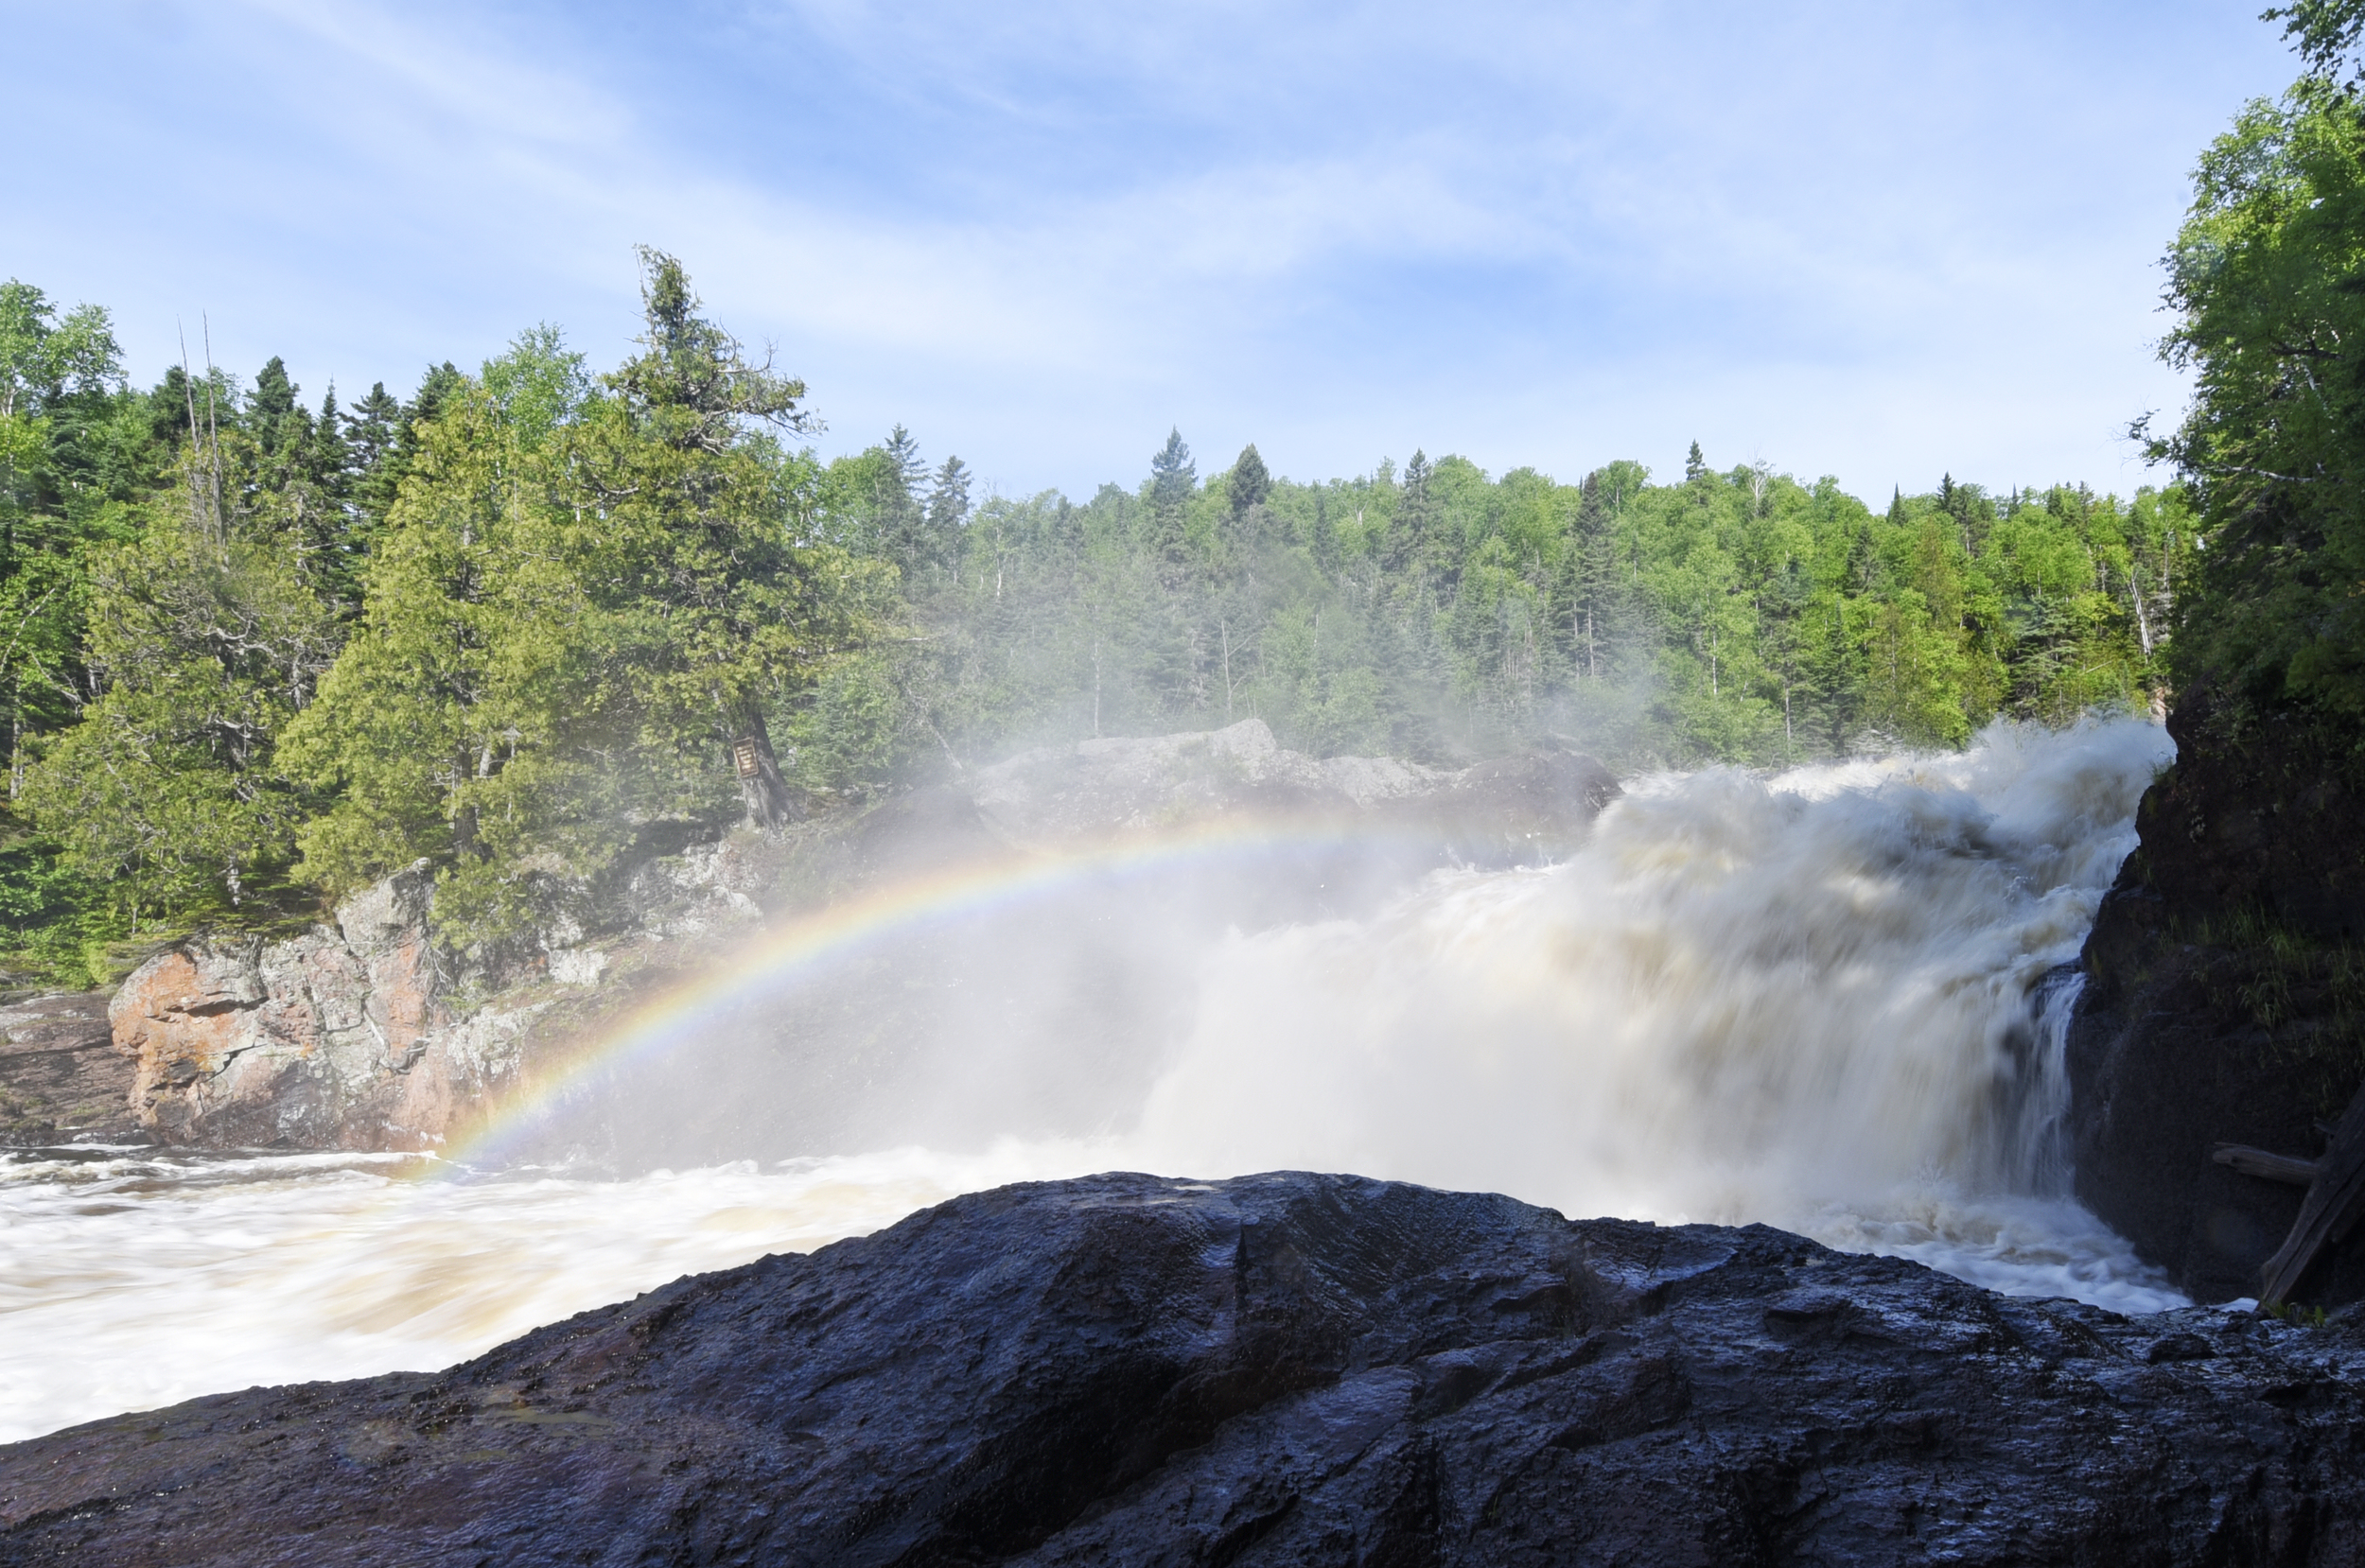  A rainbow over the Brule River in Judge C.R. Magney State Park.&nbsp; 